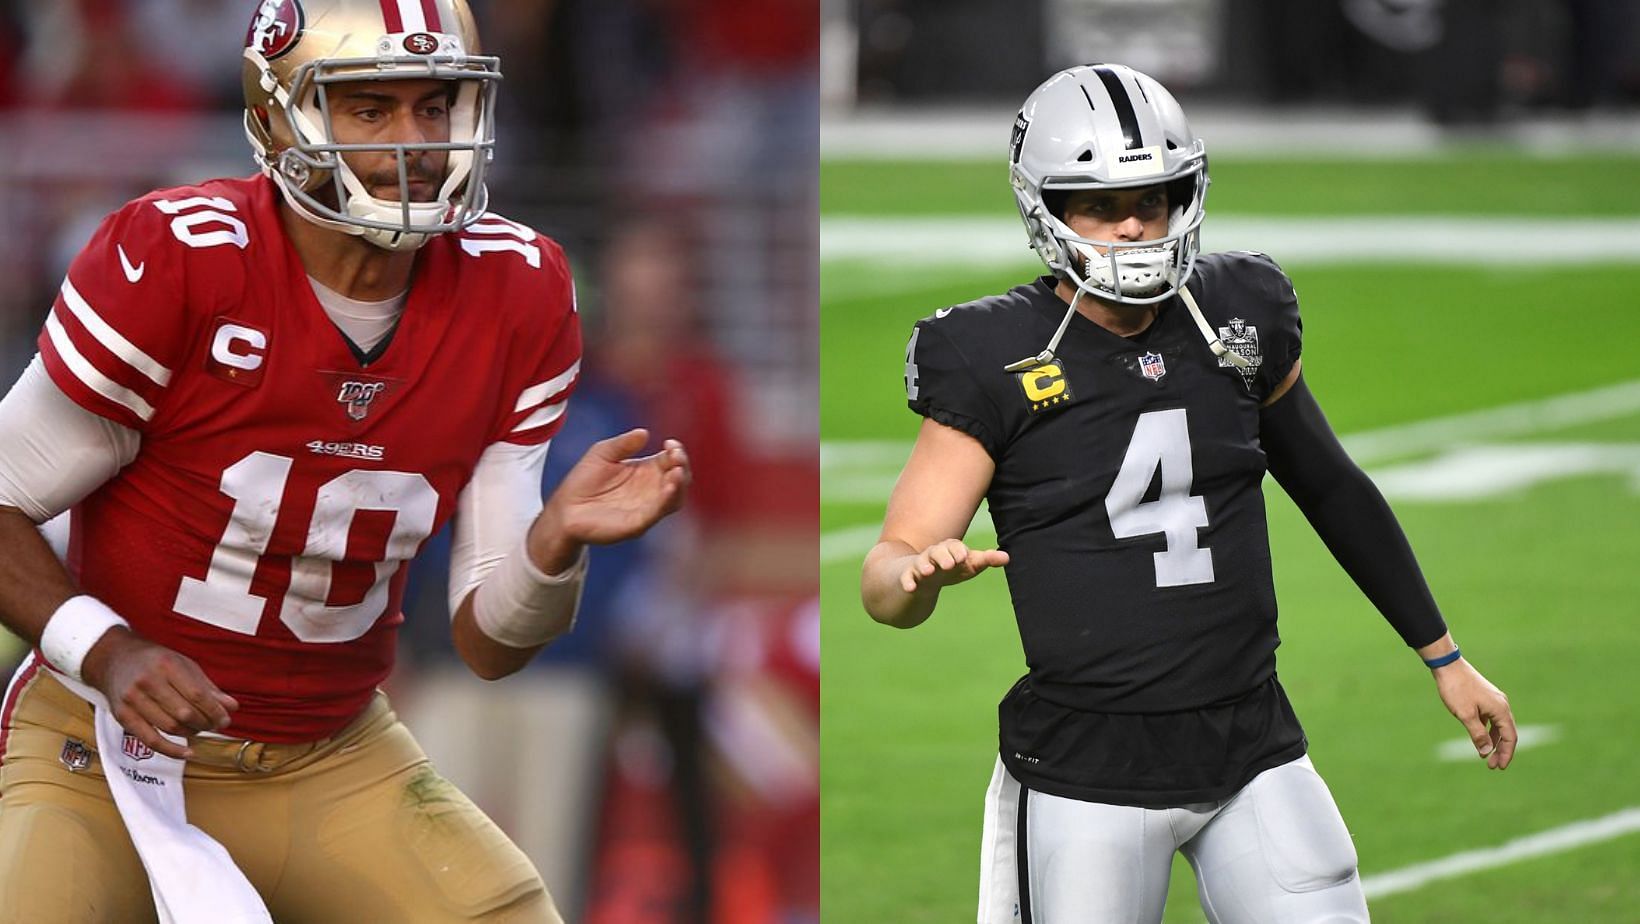 Is Jimmy Garoppolo a real update over Derek Carr?